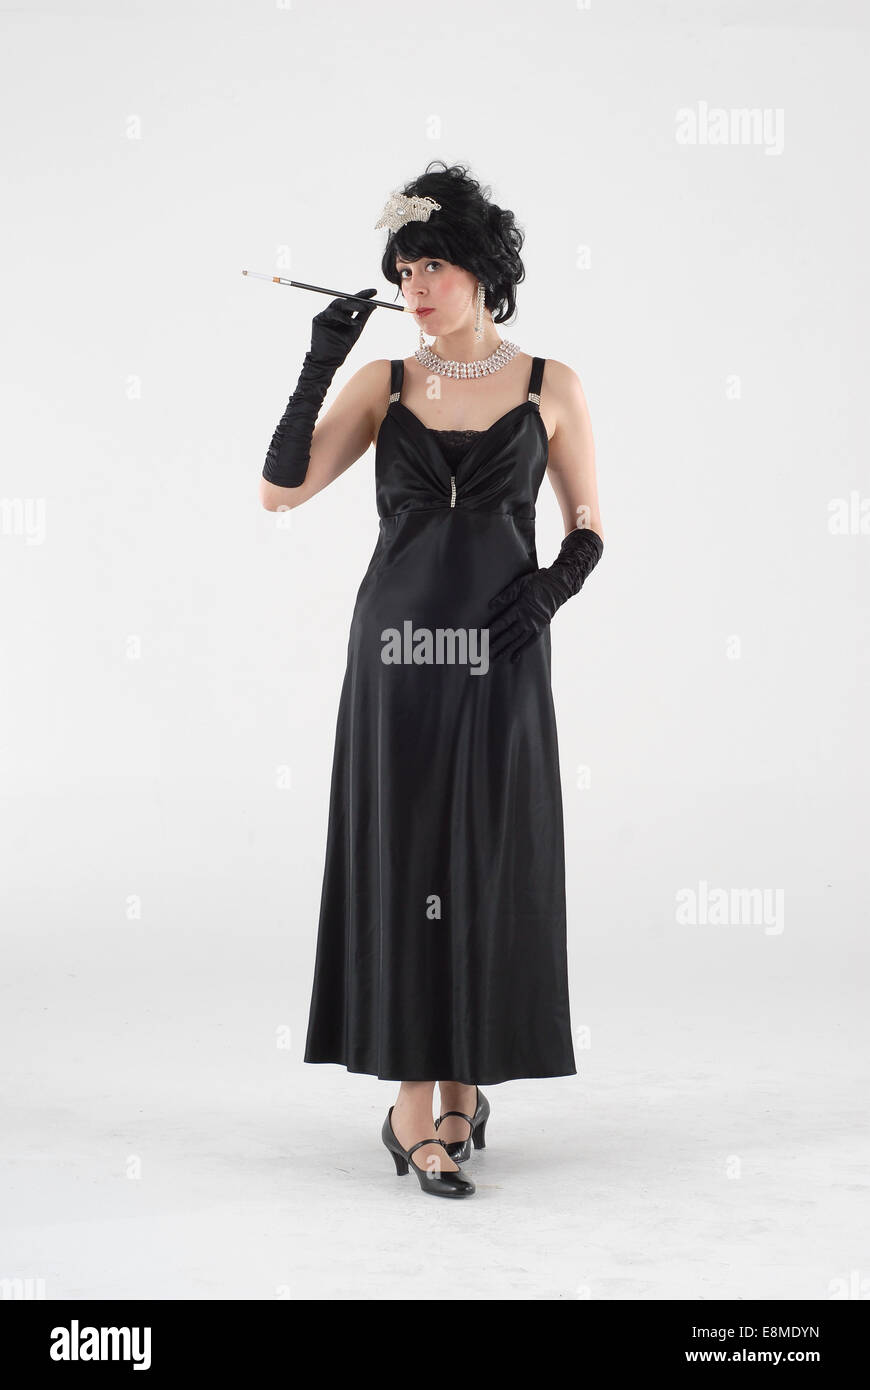 Woman in fancy dress comedy costume in a 1920s flapper fashion outfit Stock Photo